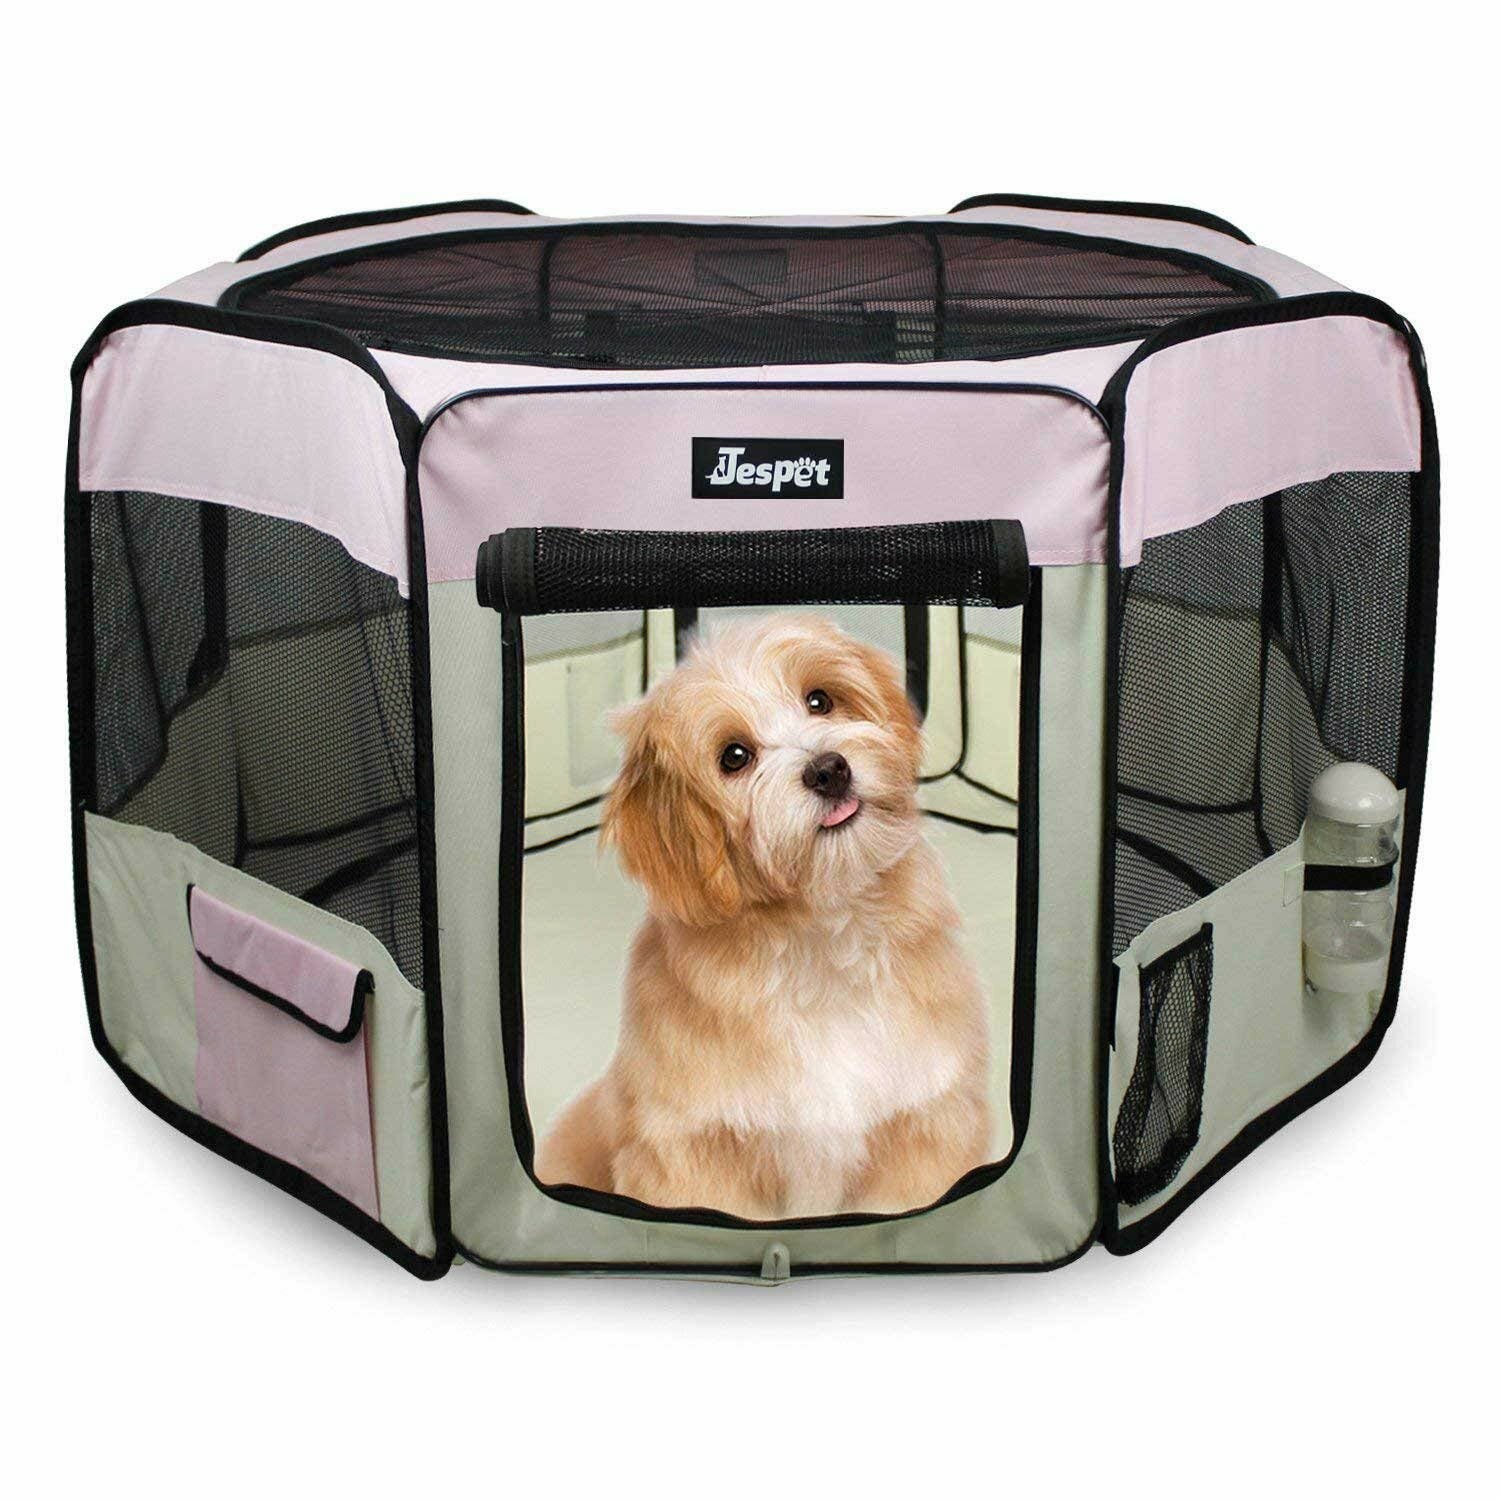 Pet Gear Travel Lite Portable Play Pen//Soft Crate with Removable Shade Top for Dogs//Cats//Rabbits 3 Sizes Durable 600D Fabric Indoor//Outdoor Built-in Stay Fold Band Easy-Fold